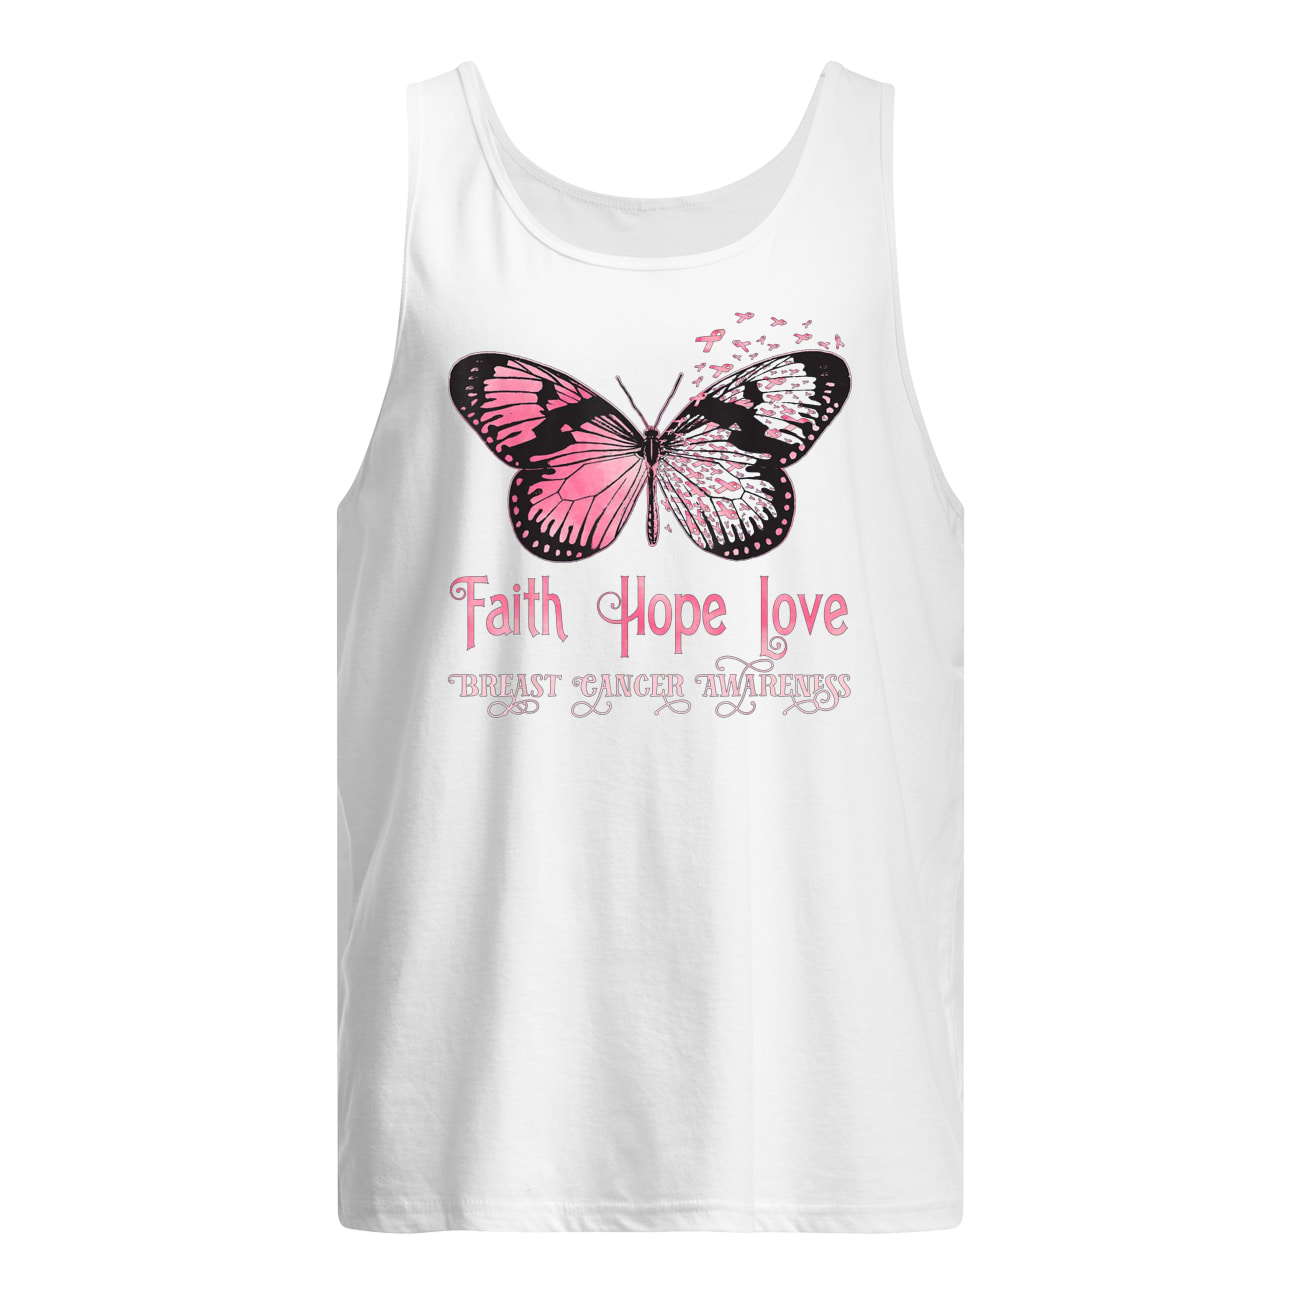 Faith hope love pink butterfly breast cancer awareness tank top